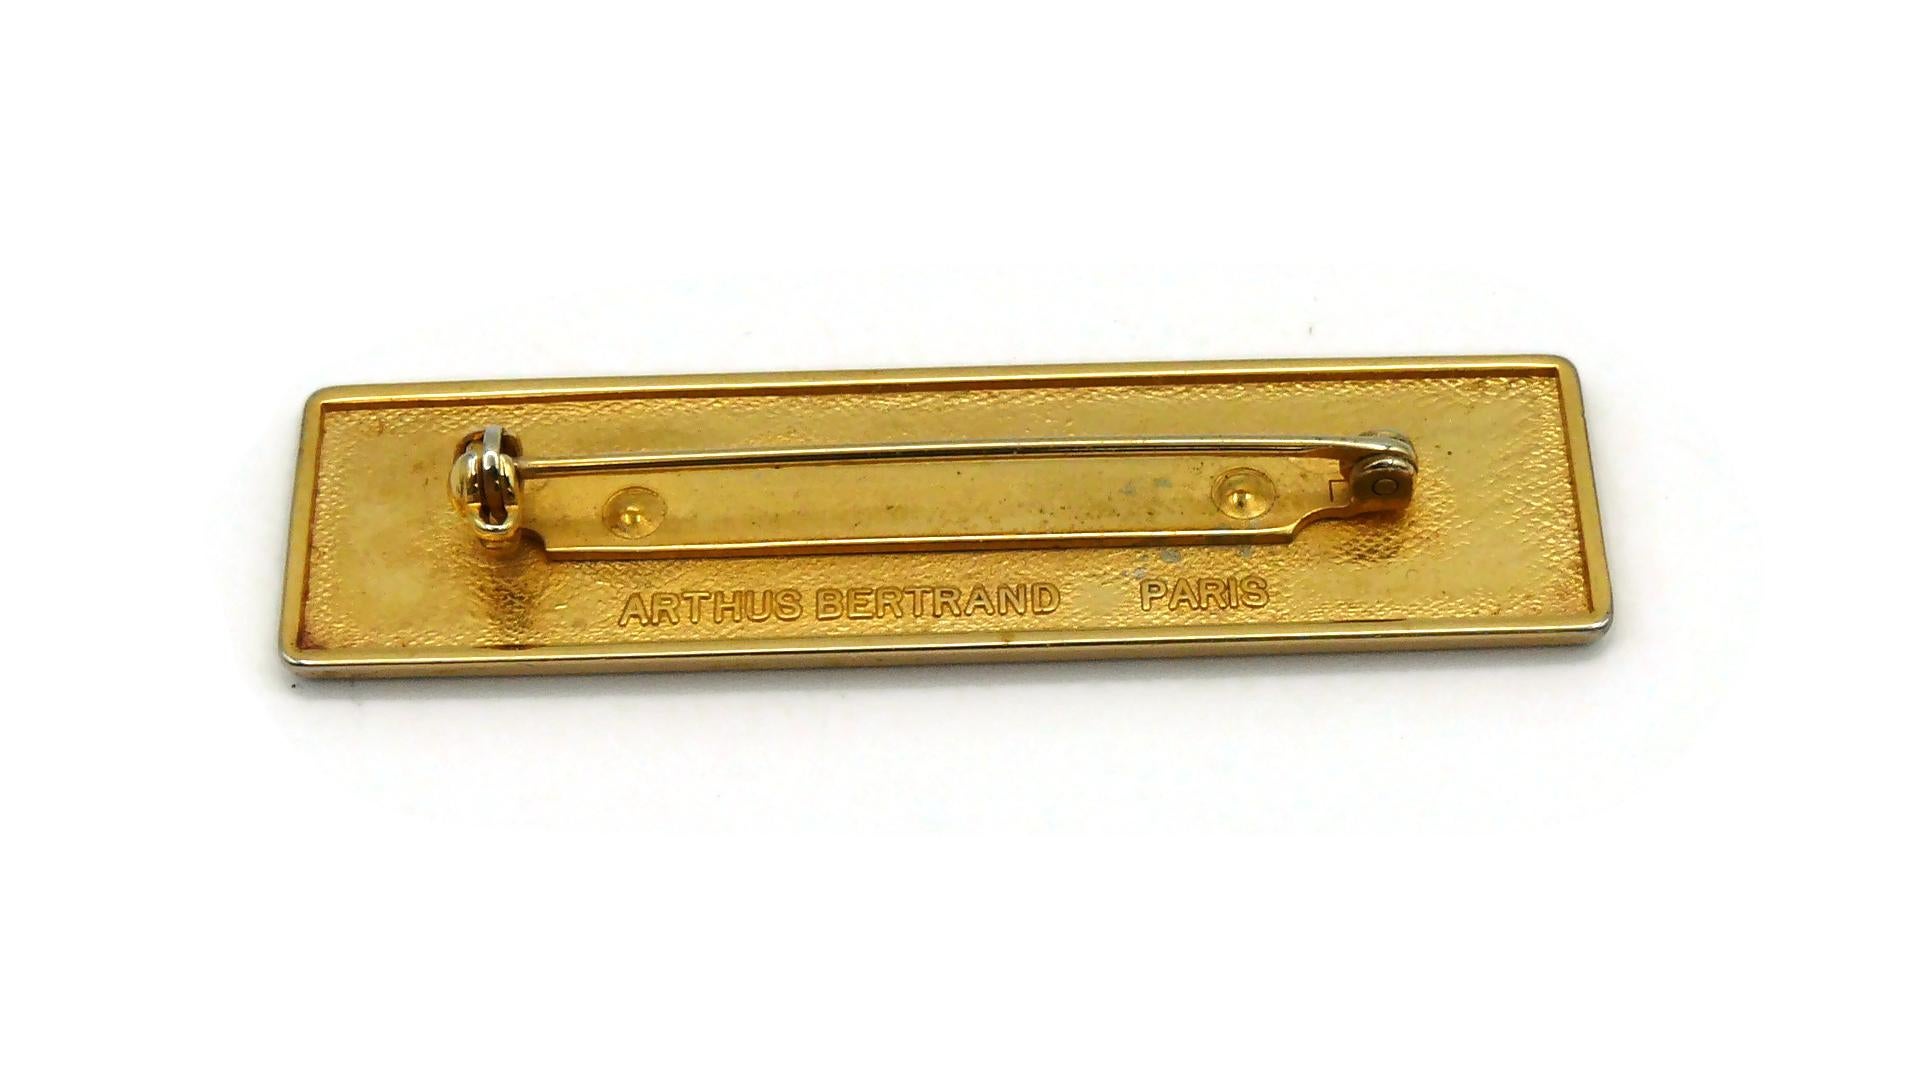 CHANEL by ARTHUS BERTRAND Paris Vintage Rectangular Uniform Brooch In Good Condition For Sale In Nice, FR